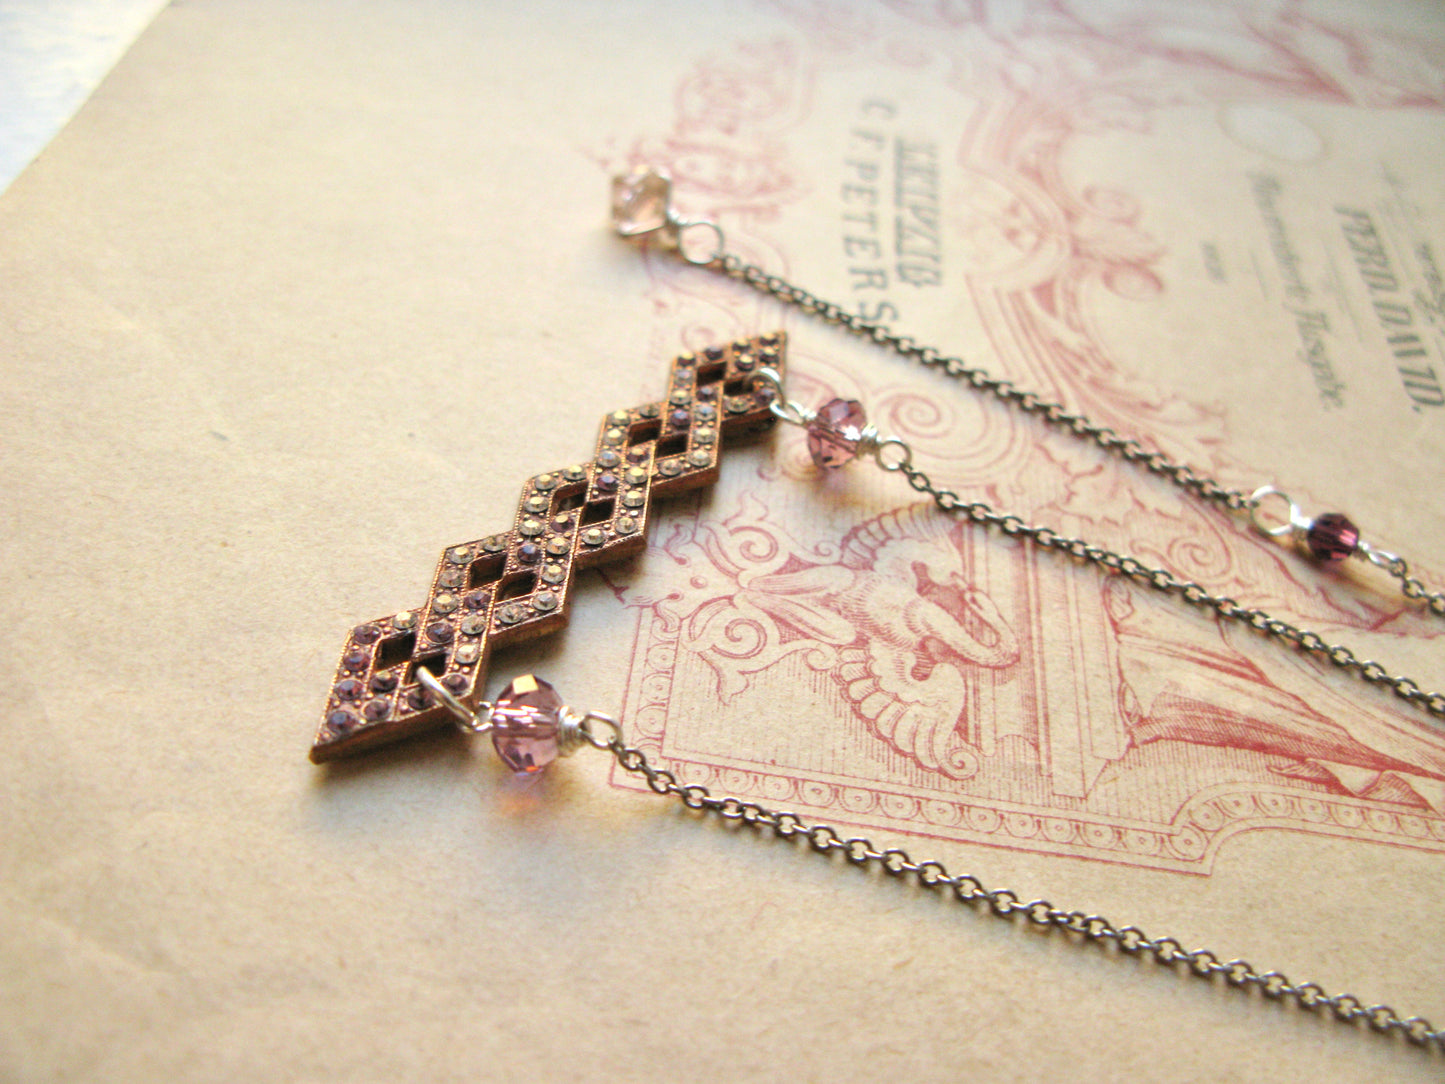 Way To Go pendant necklace in lilac+silk